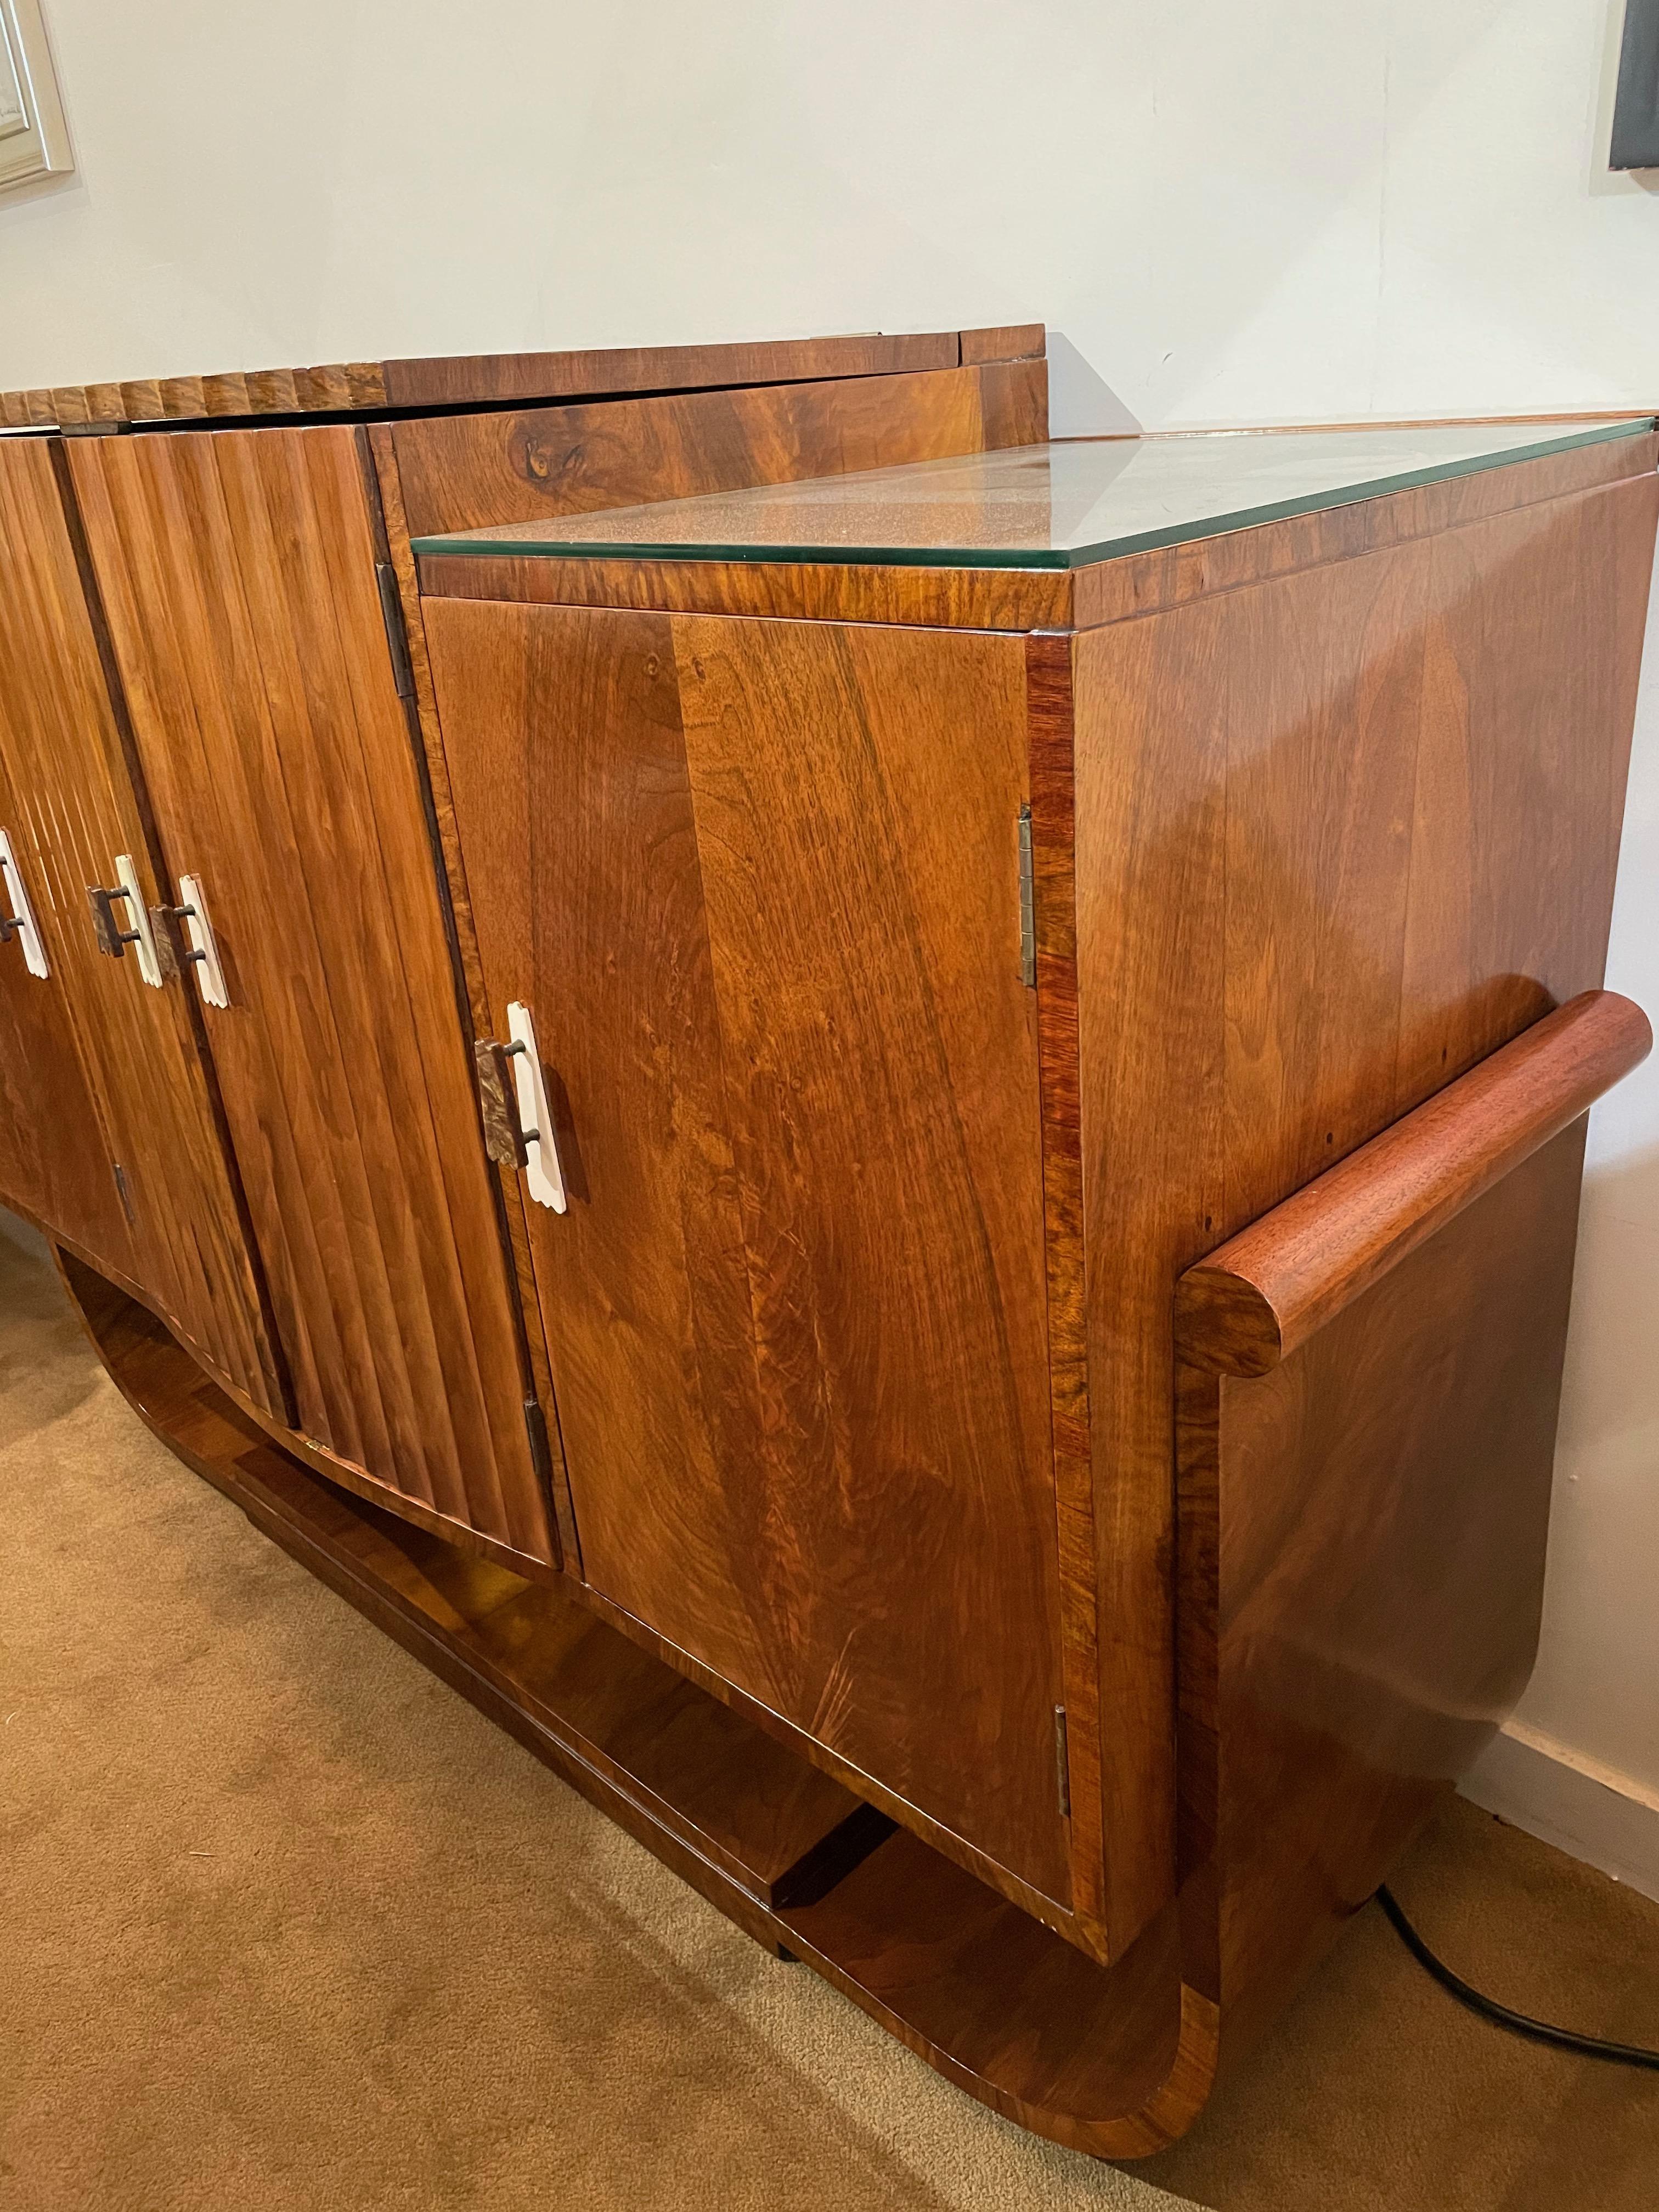 This stunning Epstein bar is Art Deco at its finest. One of England’s premier art deco furniture manufacturers, this restored walnut wood with maple wood interior is the finest quality you will see. Rich honey color offset with original bakelite